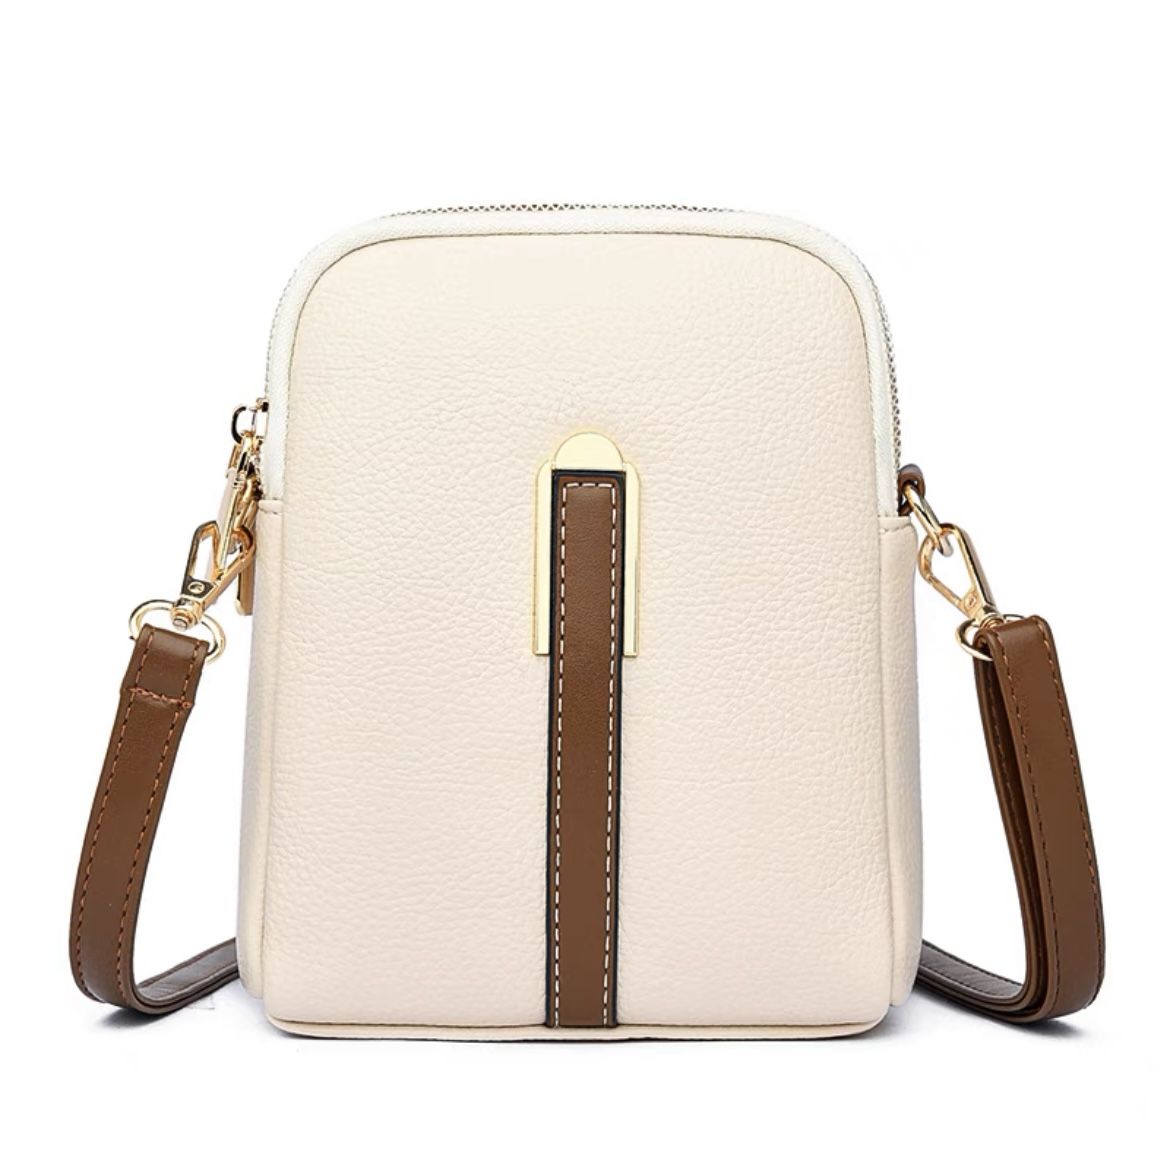 Bellade Slater Compact Pebbled PU Leather Sling Pack Crossbody Bag ...